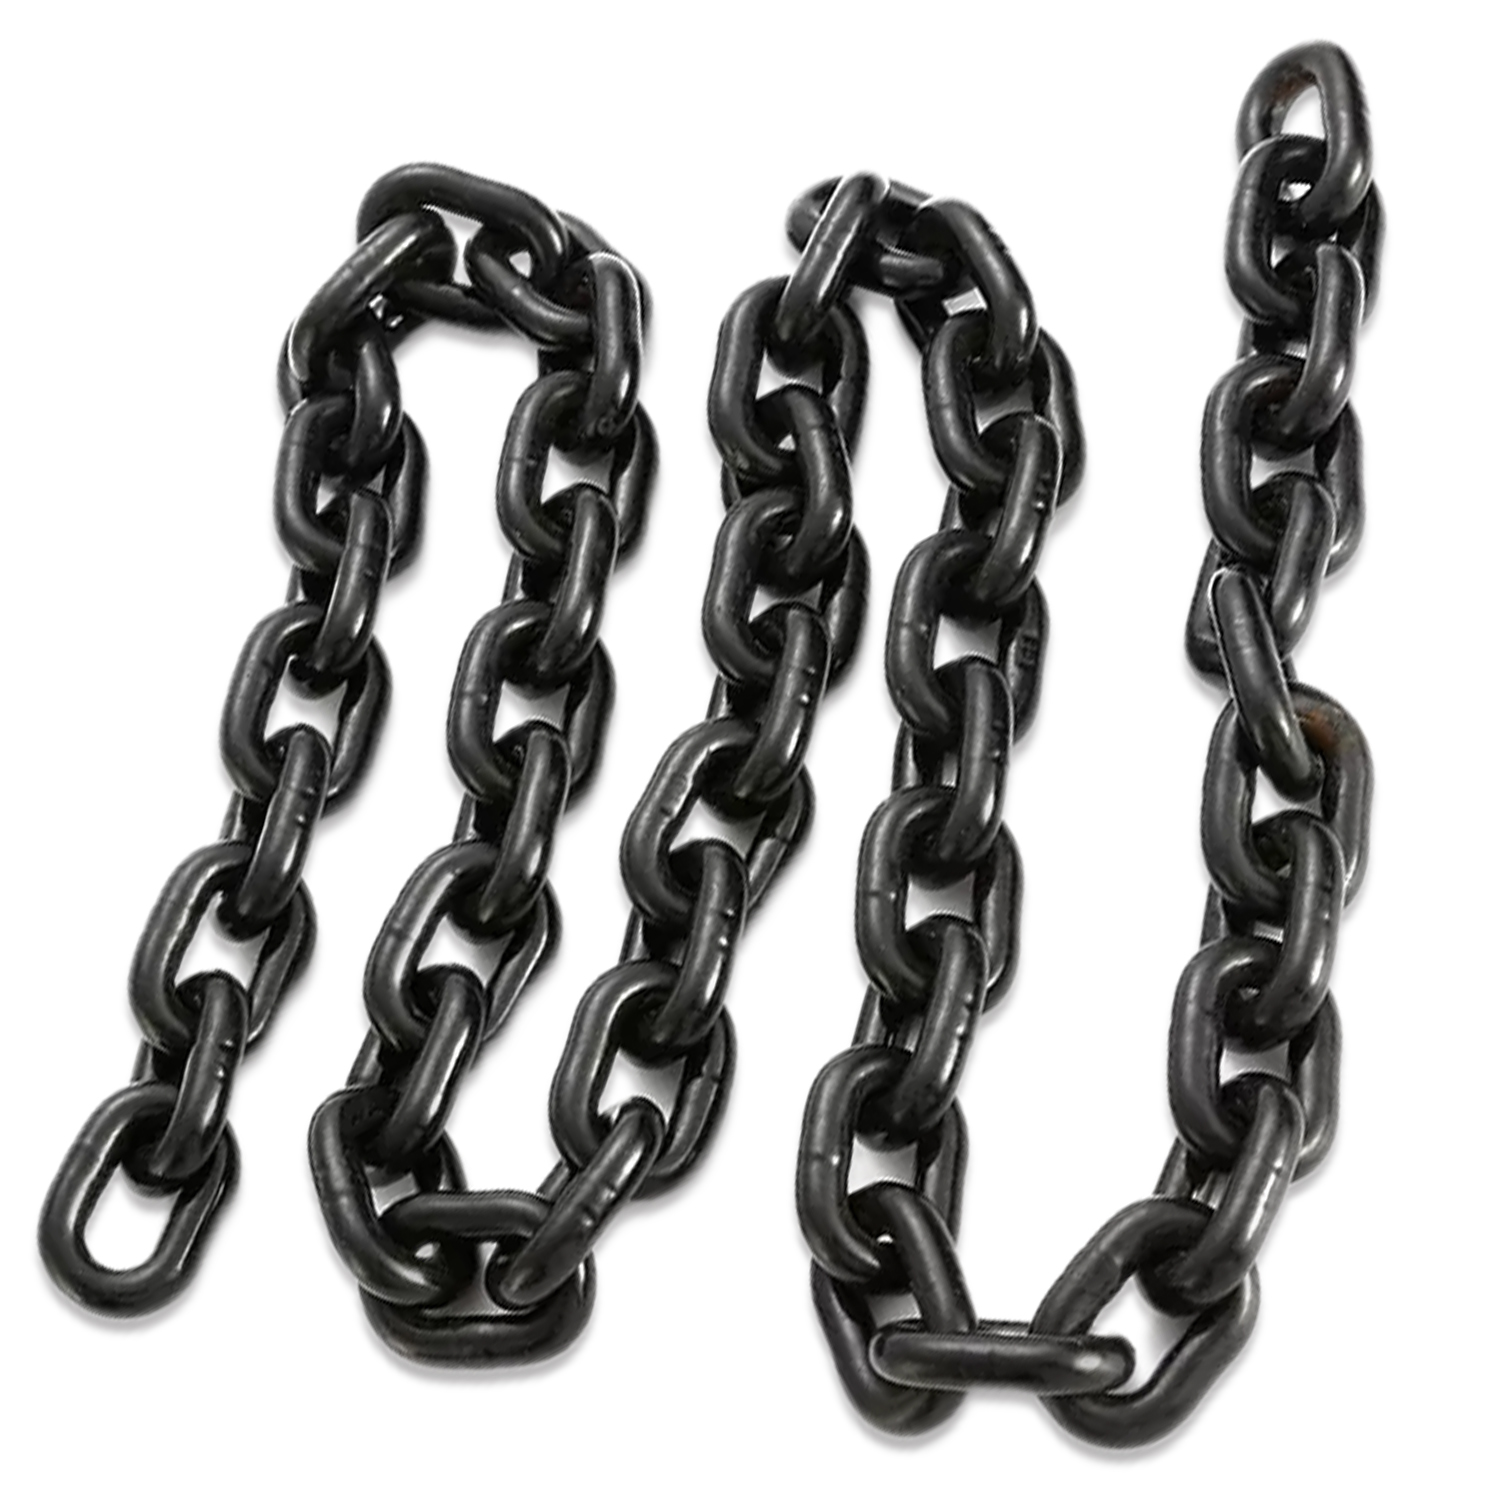 How to choose the lifting chain？